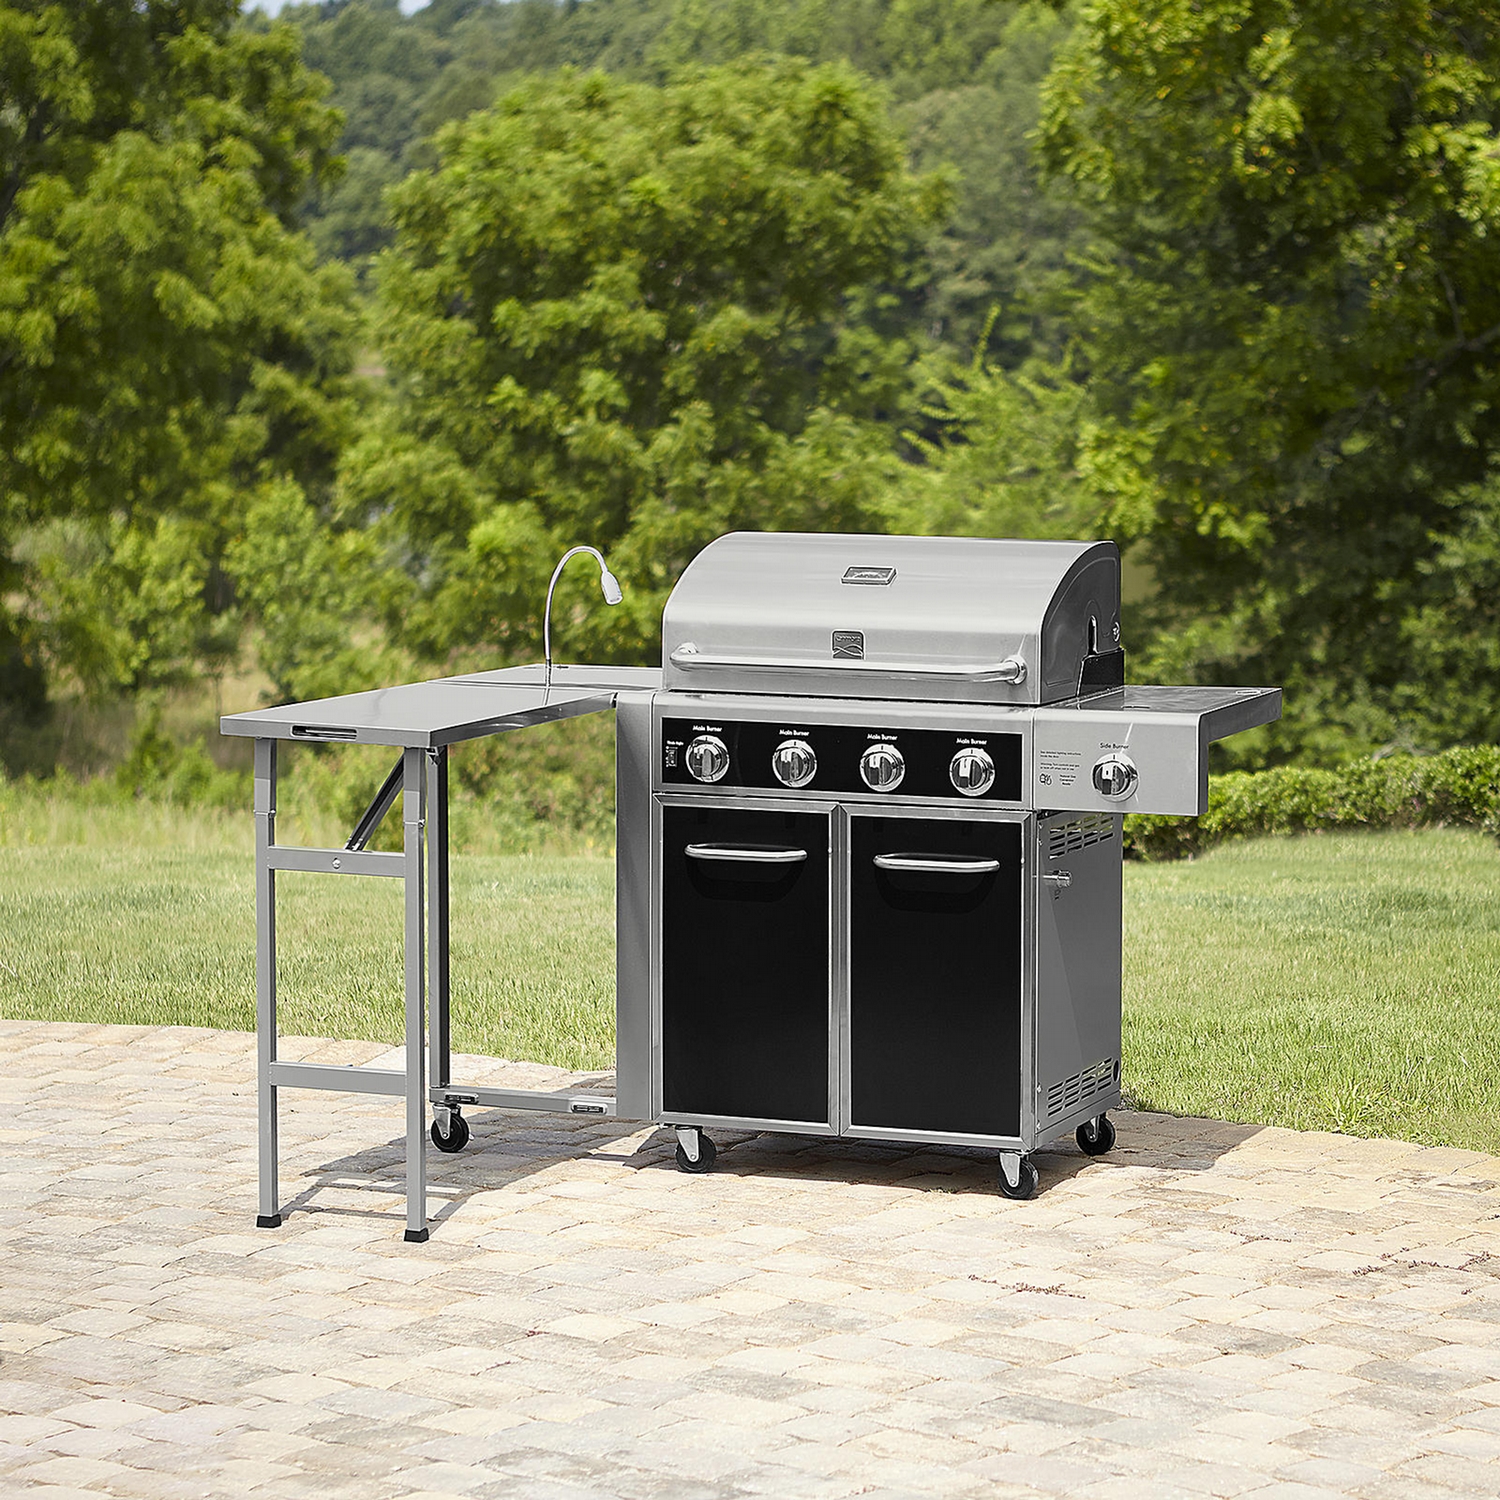 kenmore burner dual fuel gas grill with folding side table and led get outdoor prep small rectangular dog wash tub narrow console glass desk purchase linens outside umbrella stand